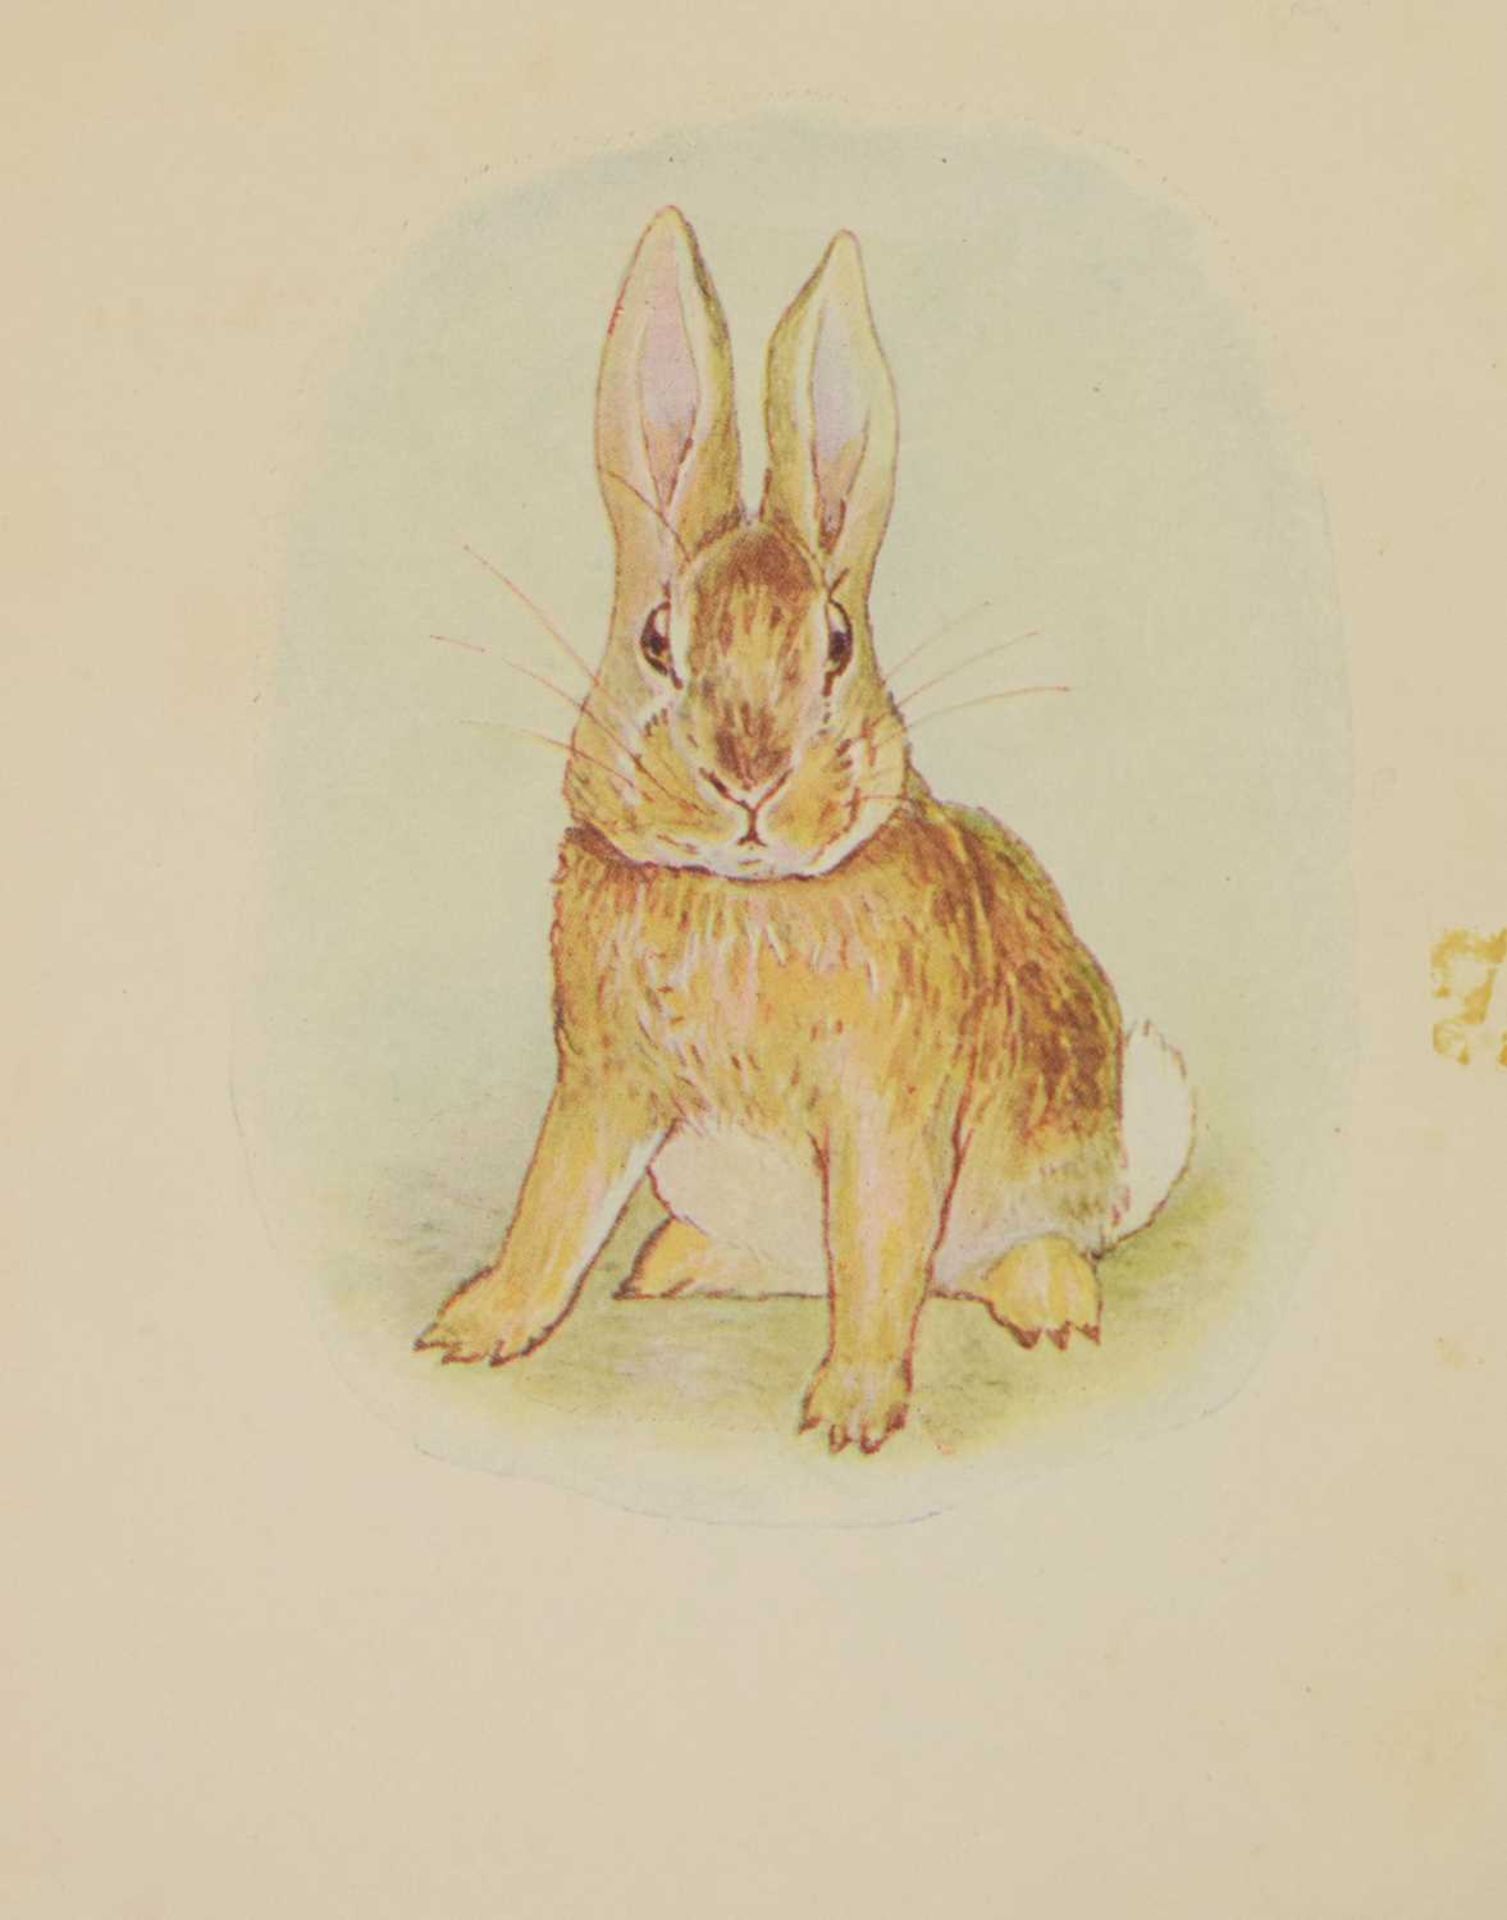 Potter, Beatrix - 'The Story of A Fierce Bad Rabbit' - First Edition - Image 7 of 20